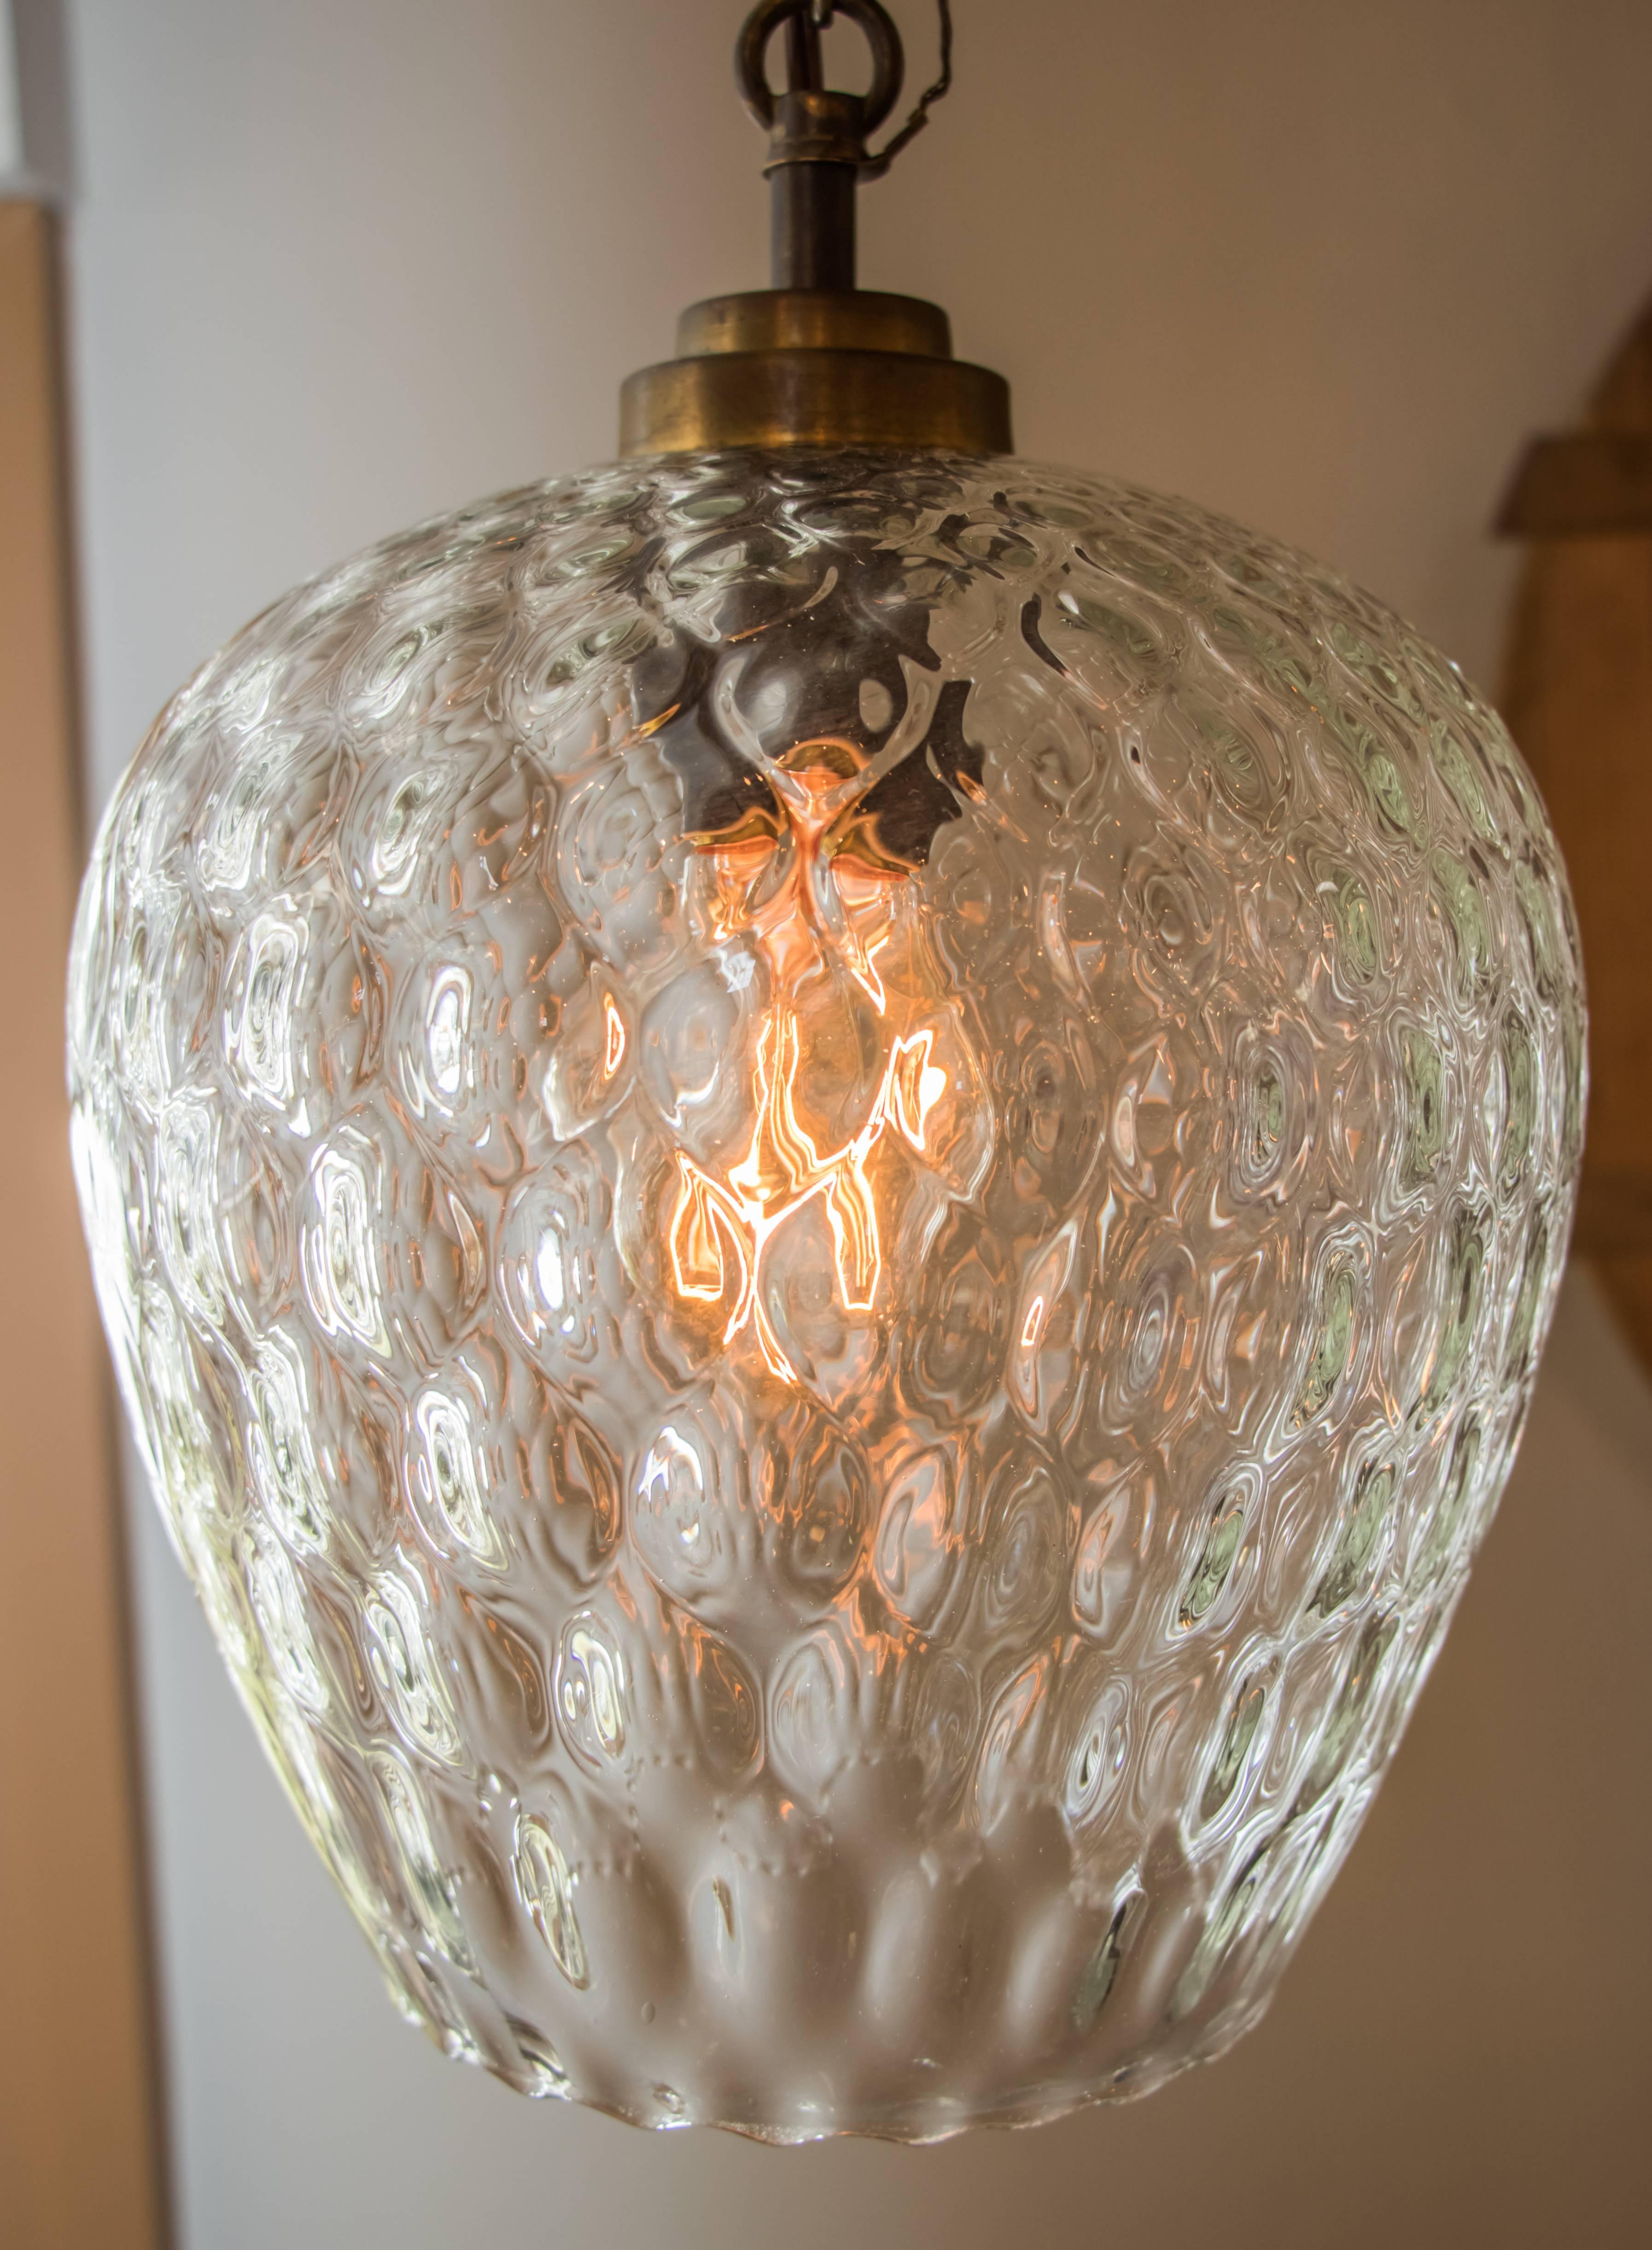 Vintage European handblown glass pendant light. Multifaceted clear glass with a thumbprint pattern that gets smaller as it reaches the top. Newly wired with all UL listed parts and a single downward facing, dark brass covered porcelain Edison